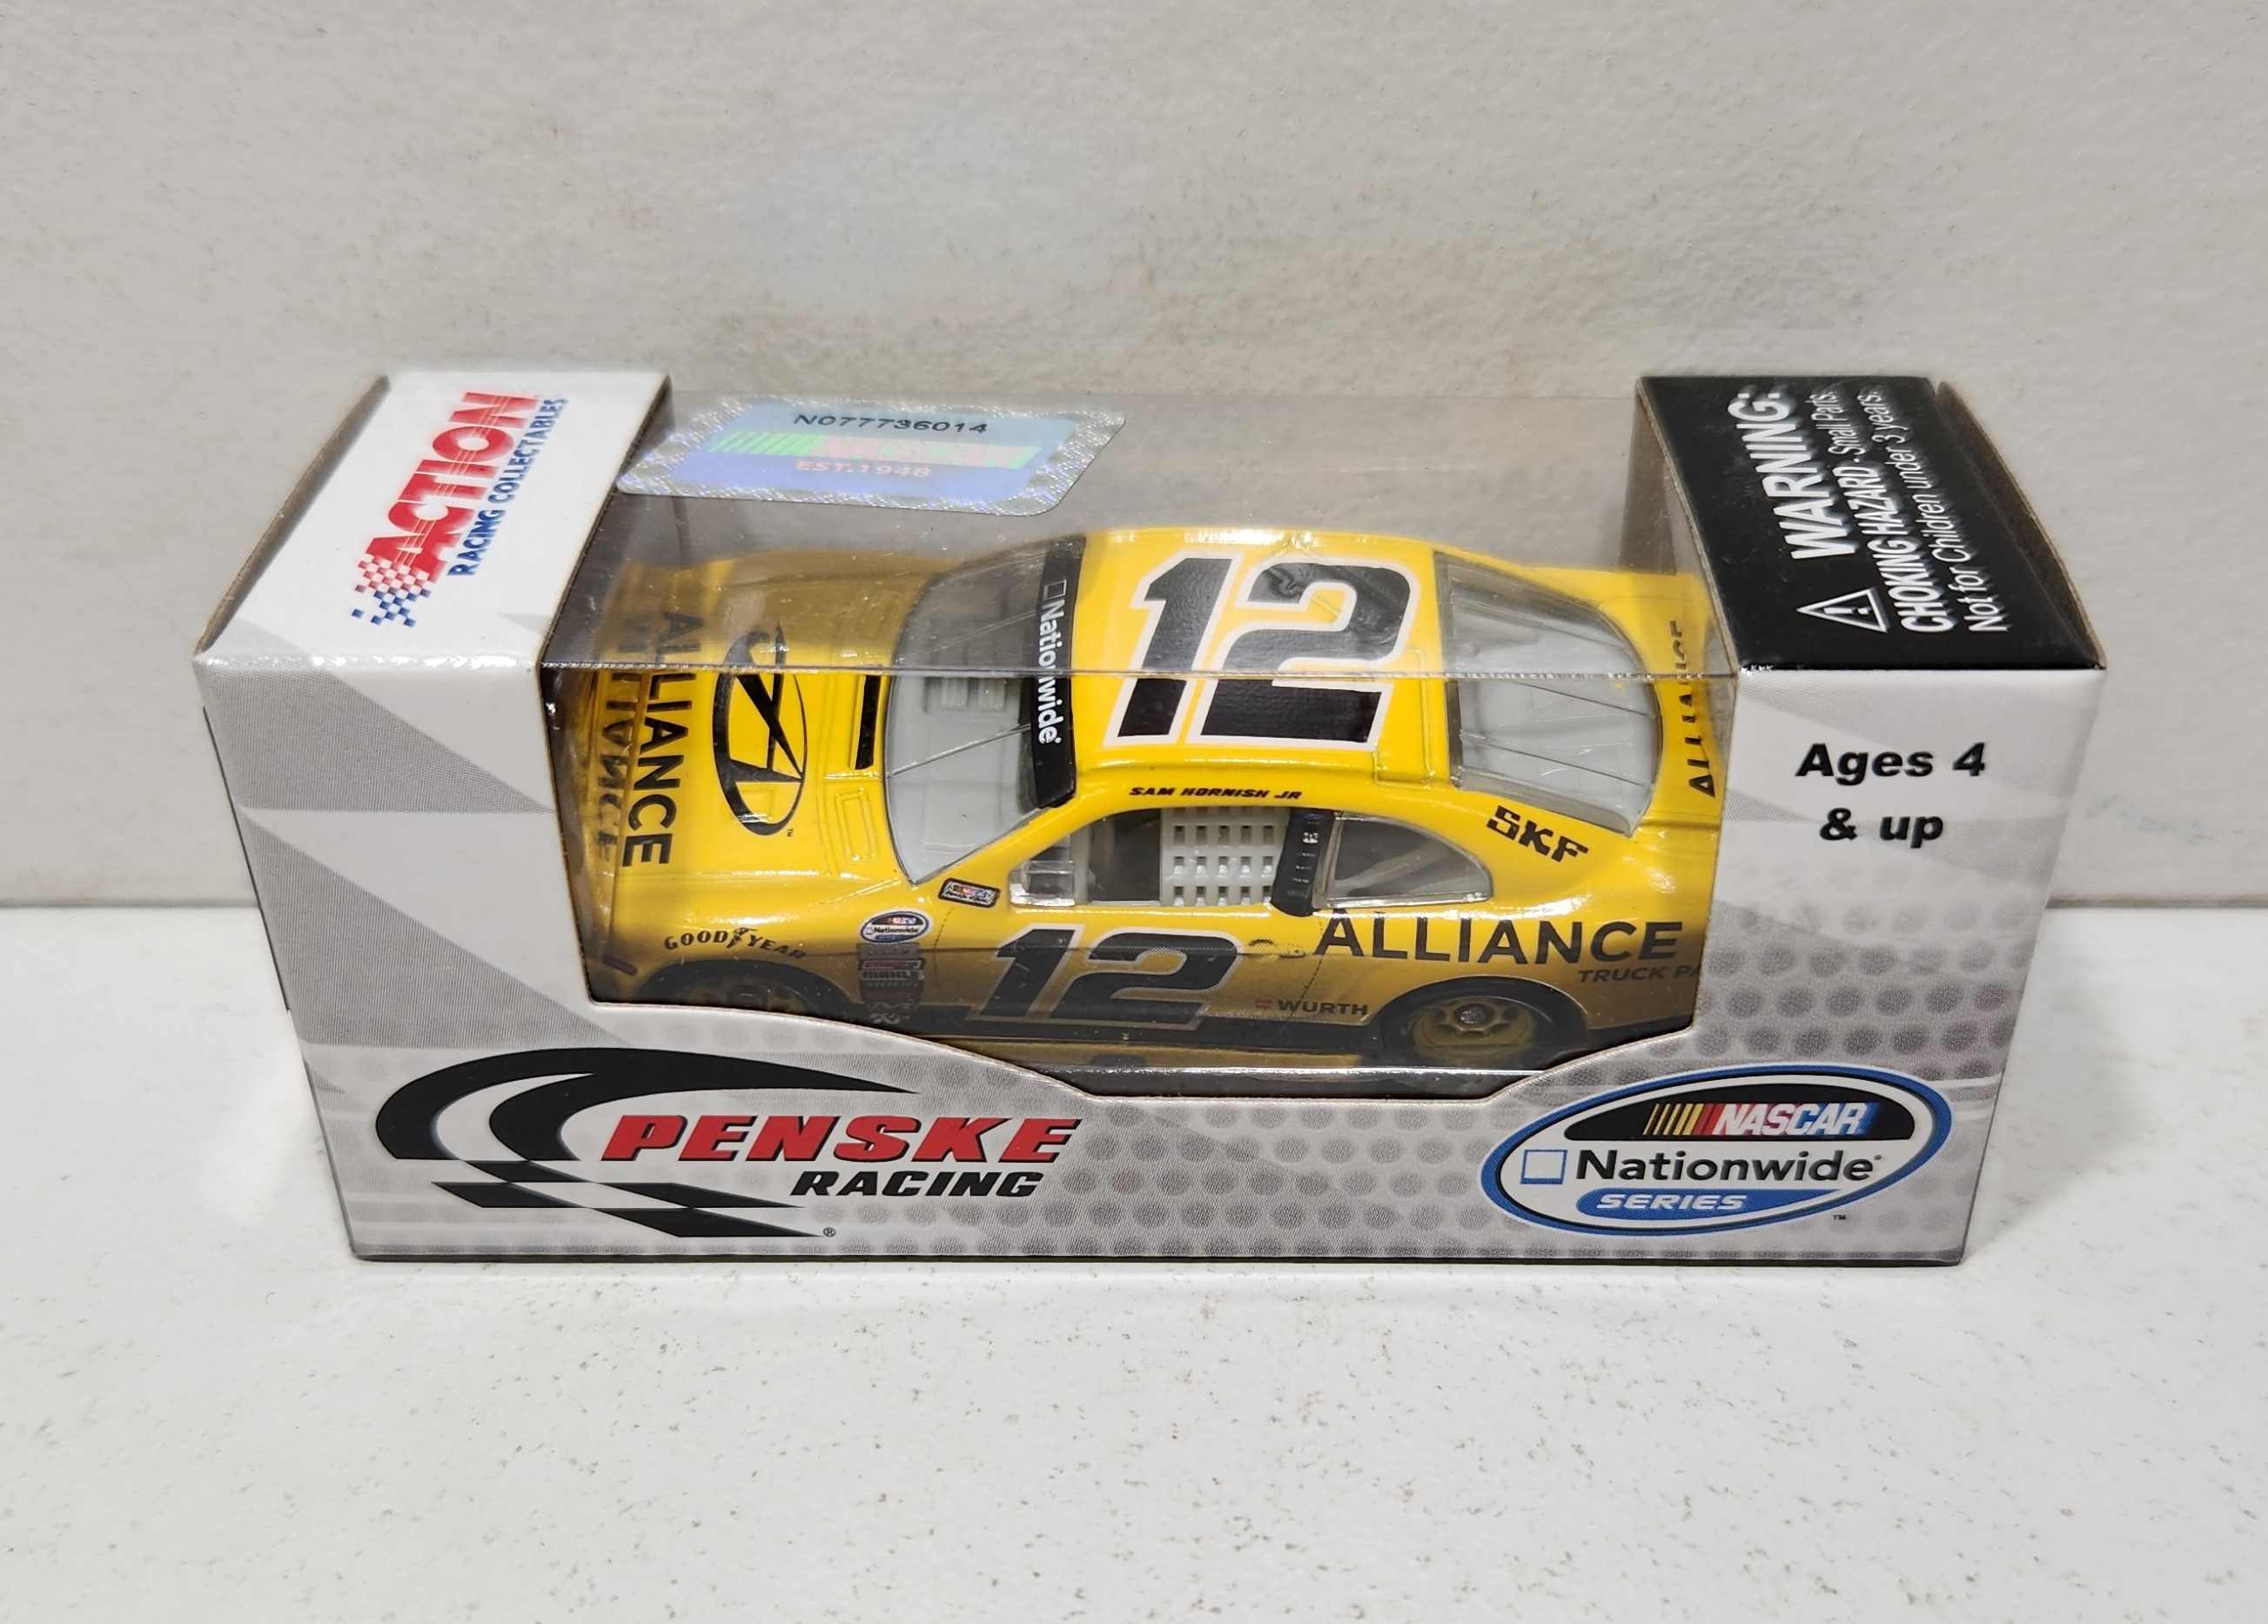 2013 Sam Hornish Jr 1/64th Alliance "Mustang""Nationwide Series" Pitstop Series Mustang